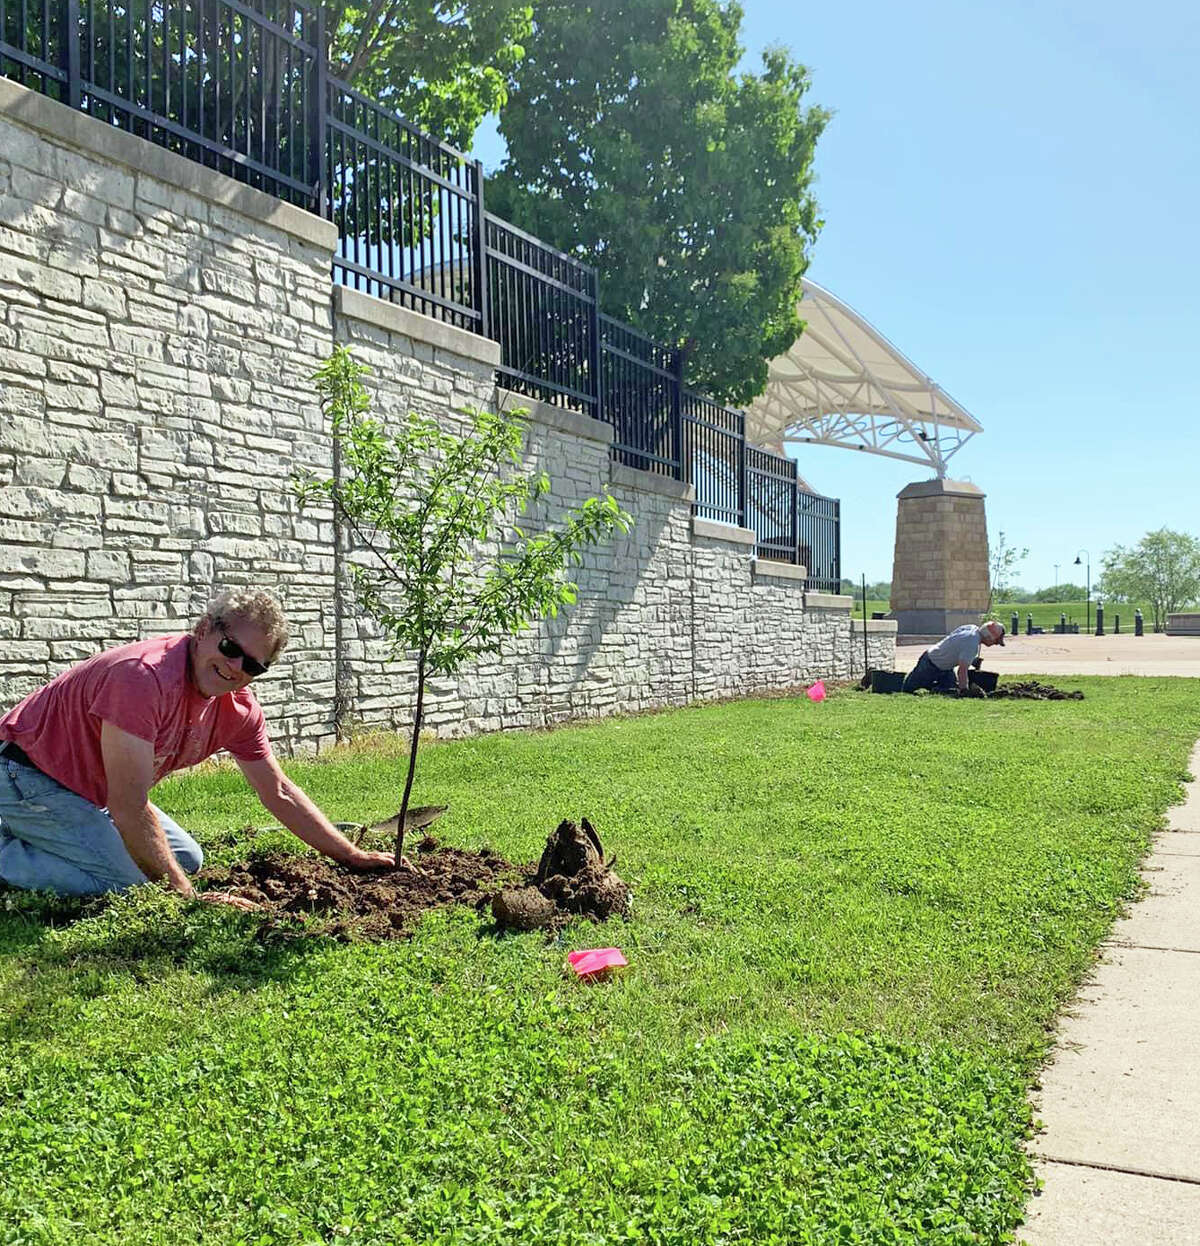 Volunteers plant trees at Riverfront Park in Alton on May 7. Another community tree planting project is planned May 25.